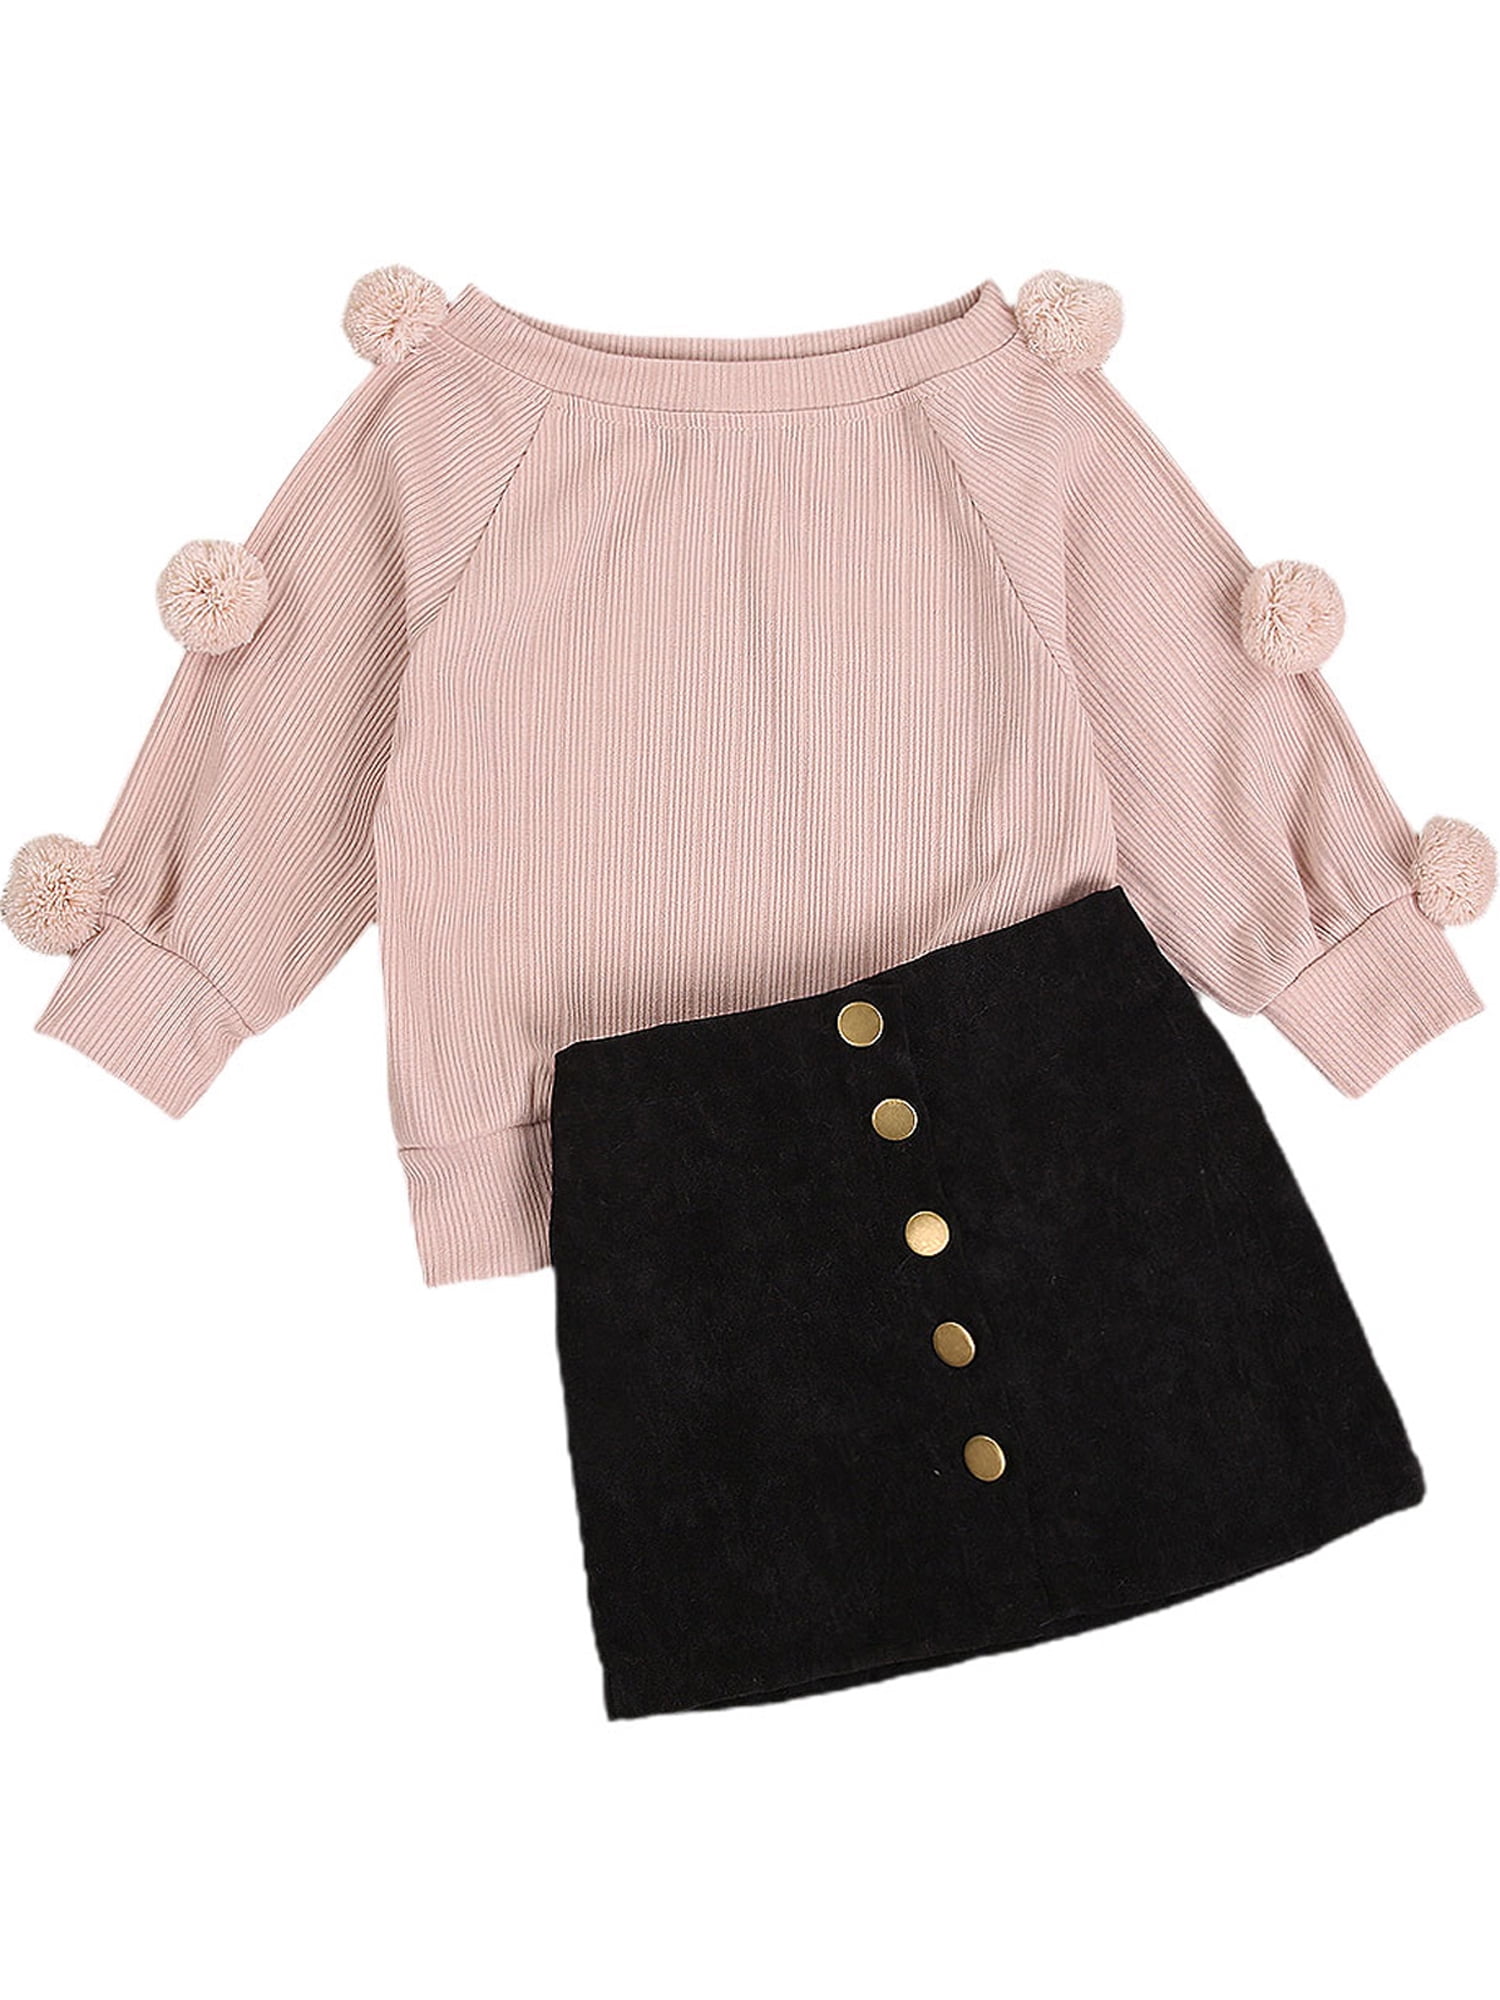 Leather Skirt Fall Winter Clothes Set Carolilly 2Pcs Toddler Baby Girl Outfits Set Long Puff Sleeve Knitted Shirt 